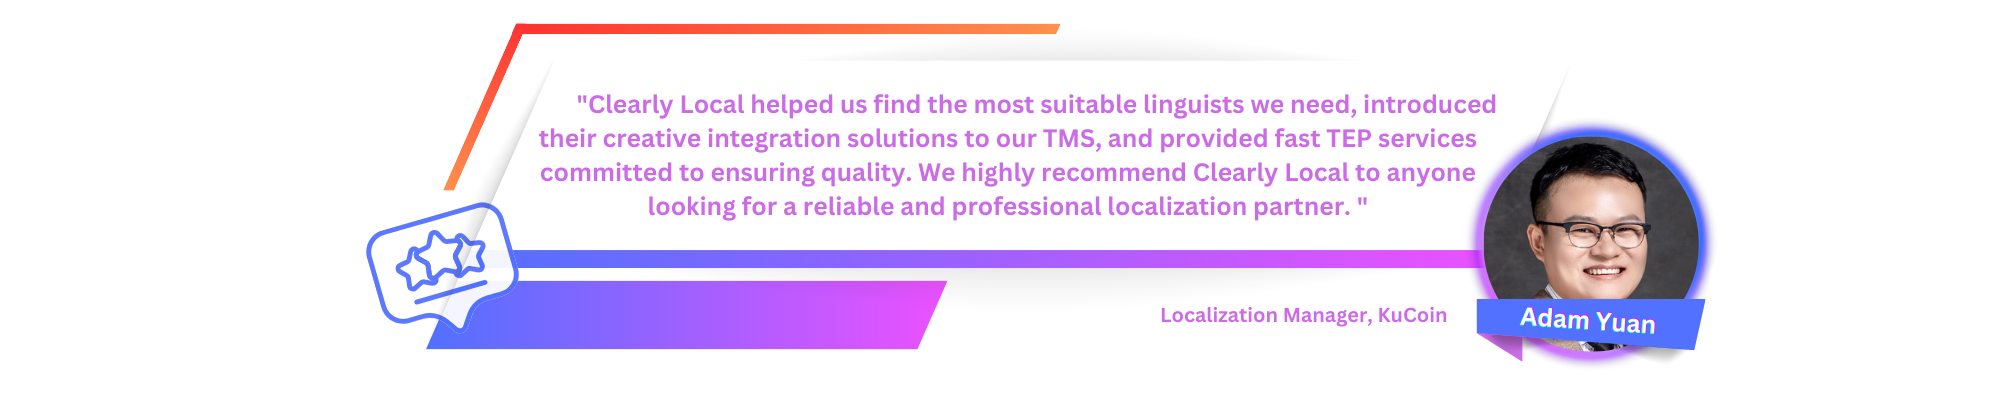 Clearly Local helped us find the most suitable linguists we need, introduced their creative integration solutions to our TMS, and provided fast TEP services committed to ensuring quality. We highly recommend Clearly Local to anyone looking for a reliable and professional localization partner. 